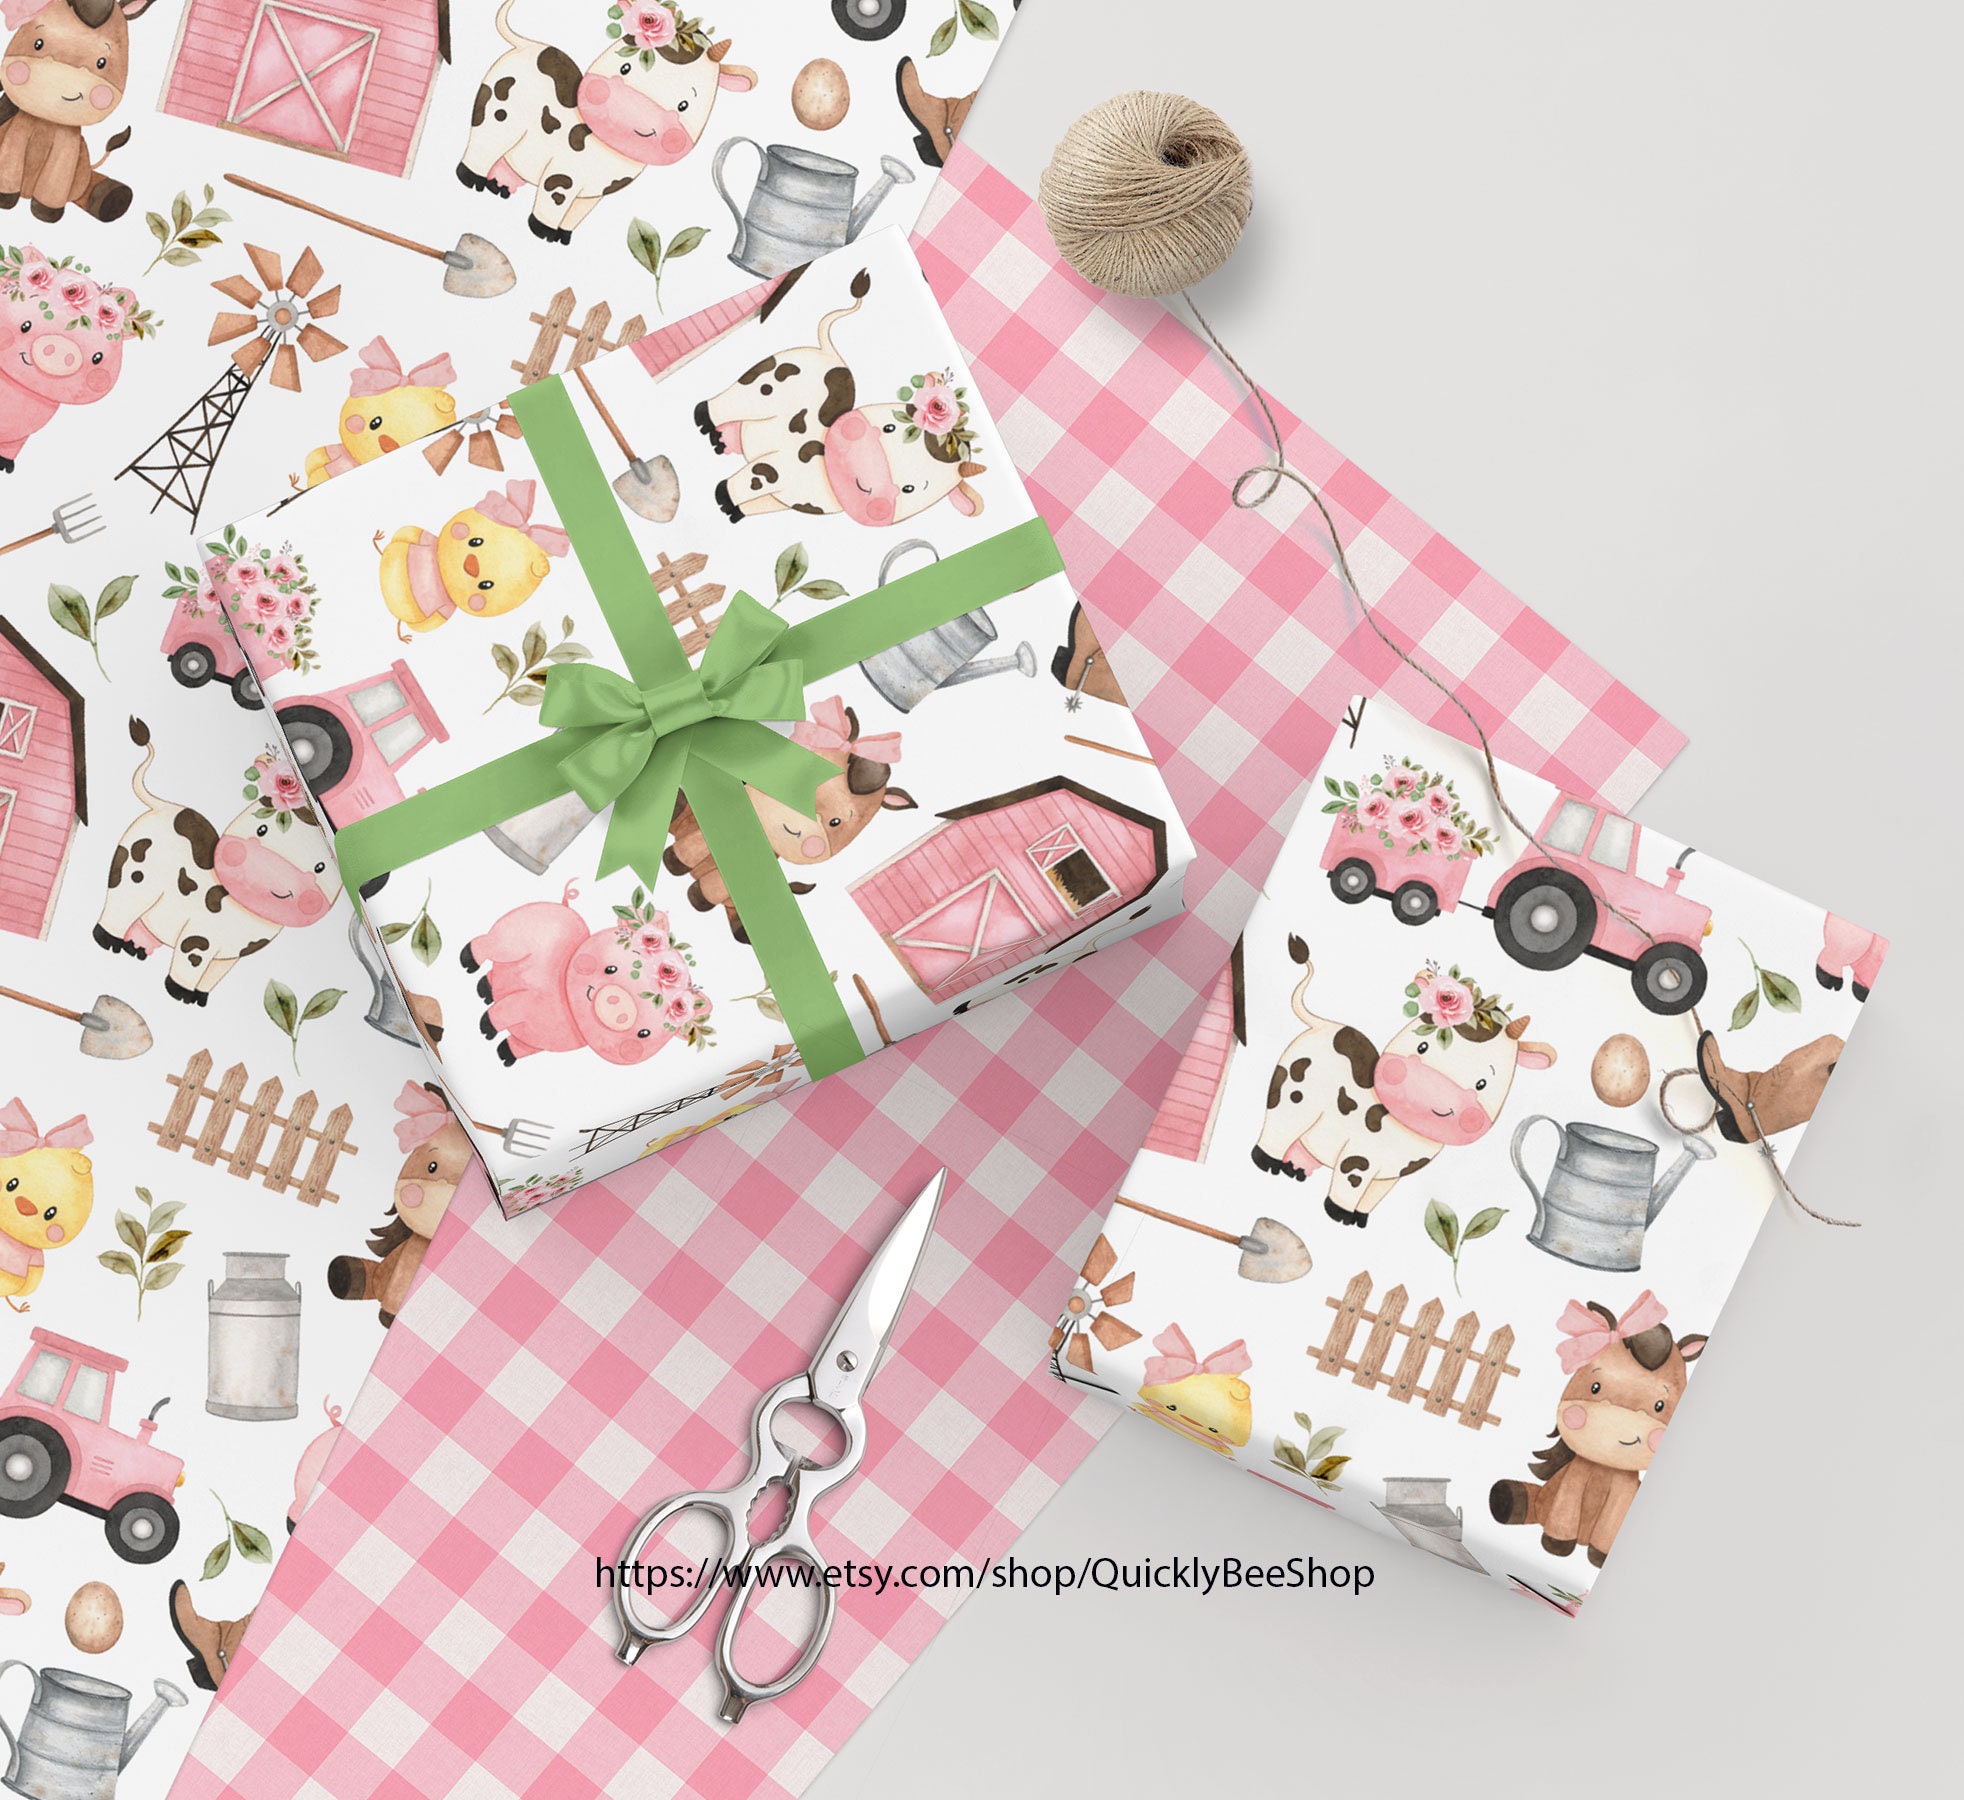 Baby Boy Wrapping Paper by Coilyandcute